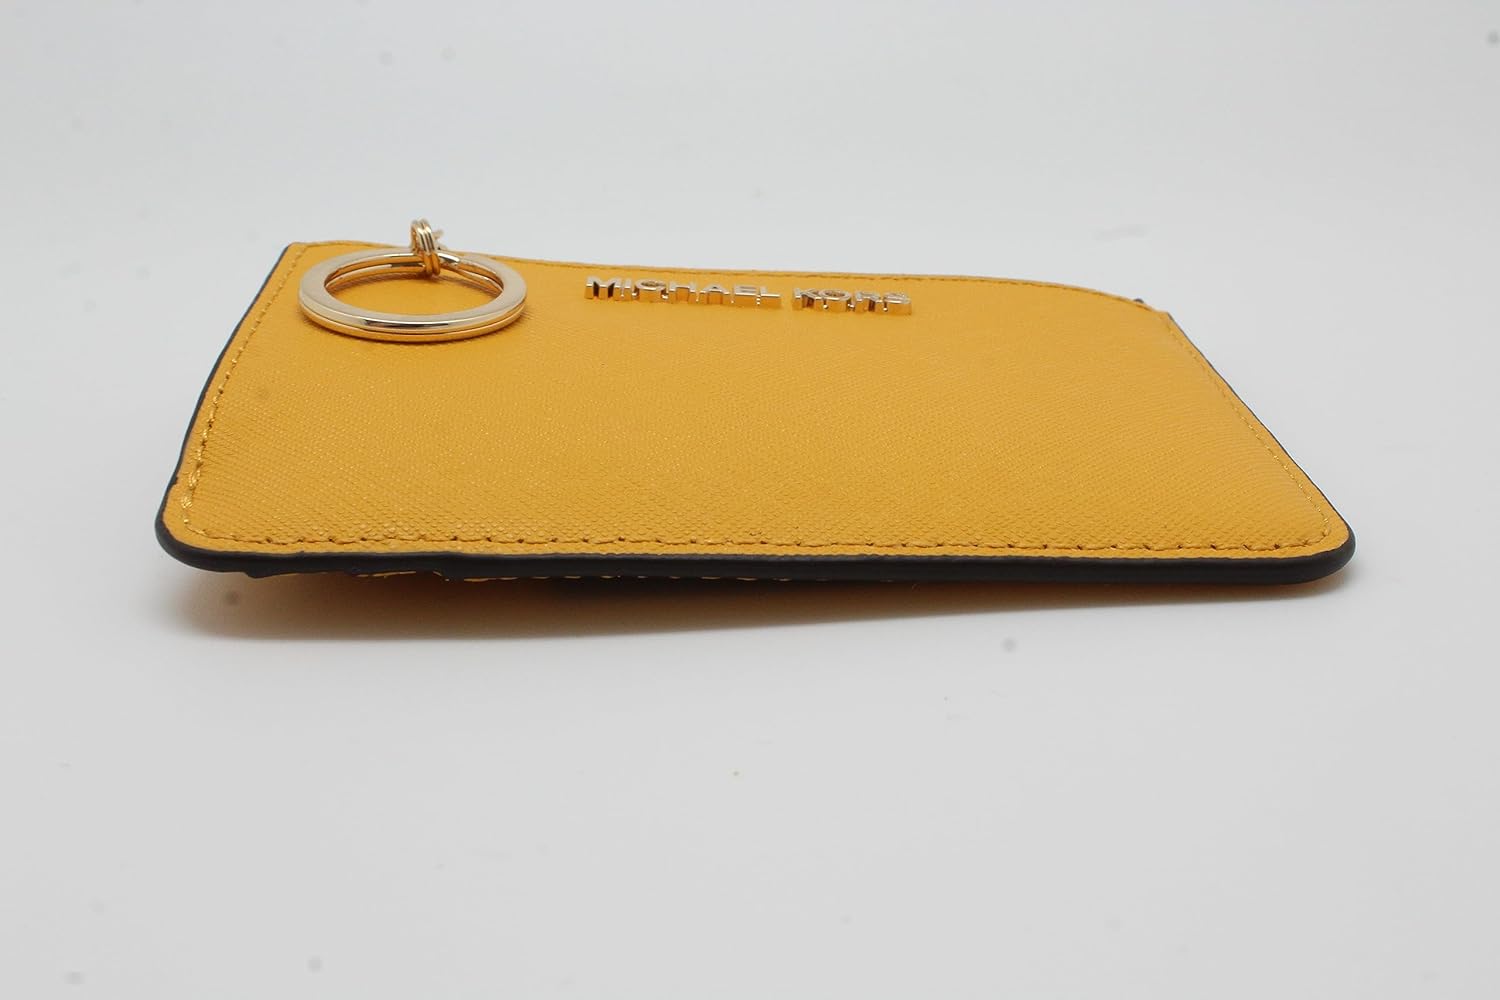 Michael Kors Jet Set Travel Small Top Zip Coin Pouch with ID Holder in Saffiano Leather (Jasmine Yellow, 1) - image 4 of 6